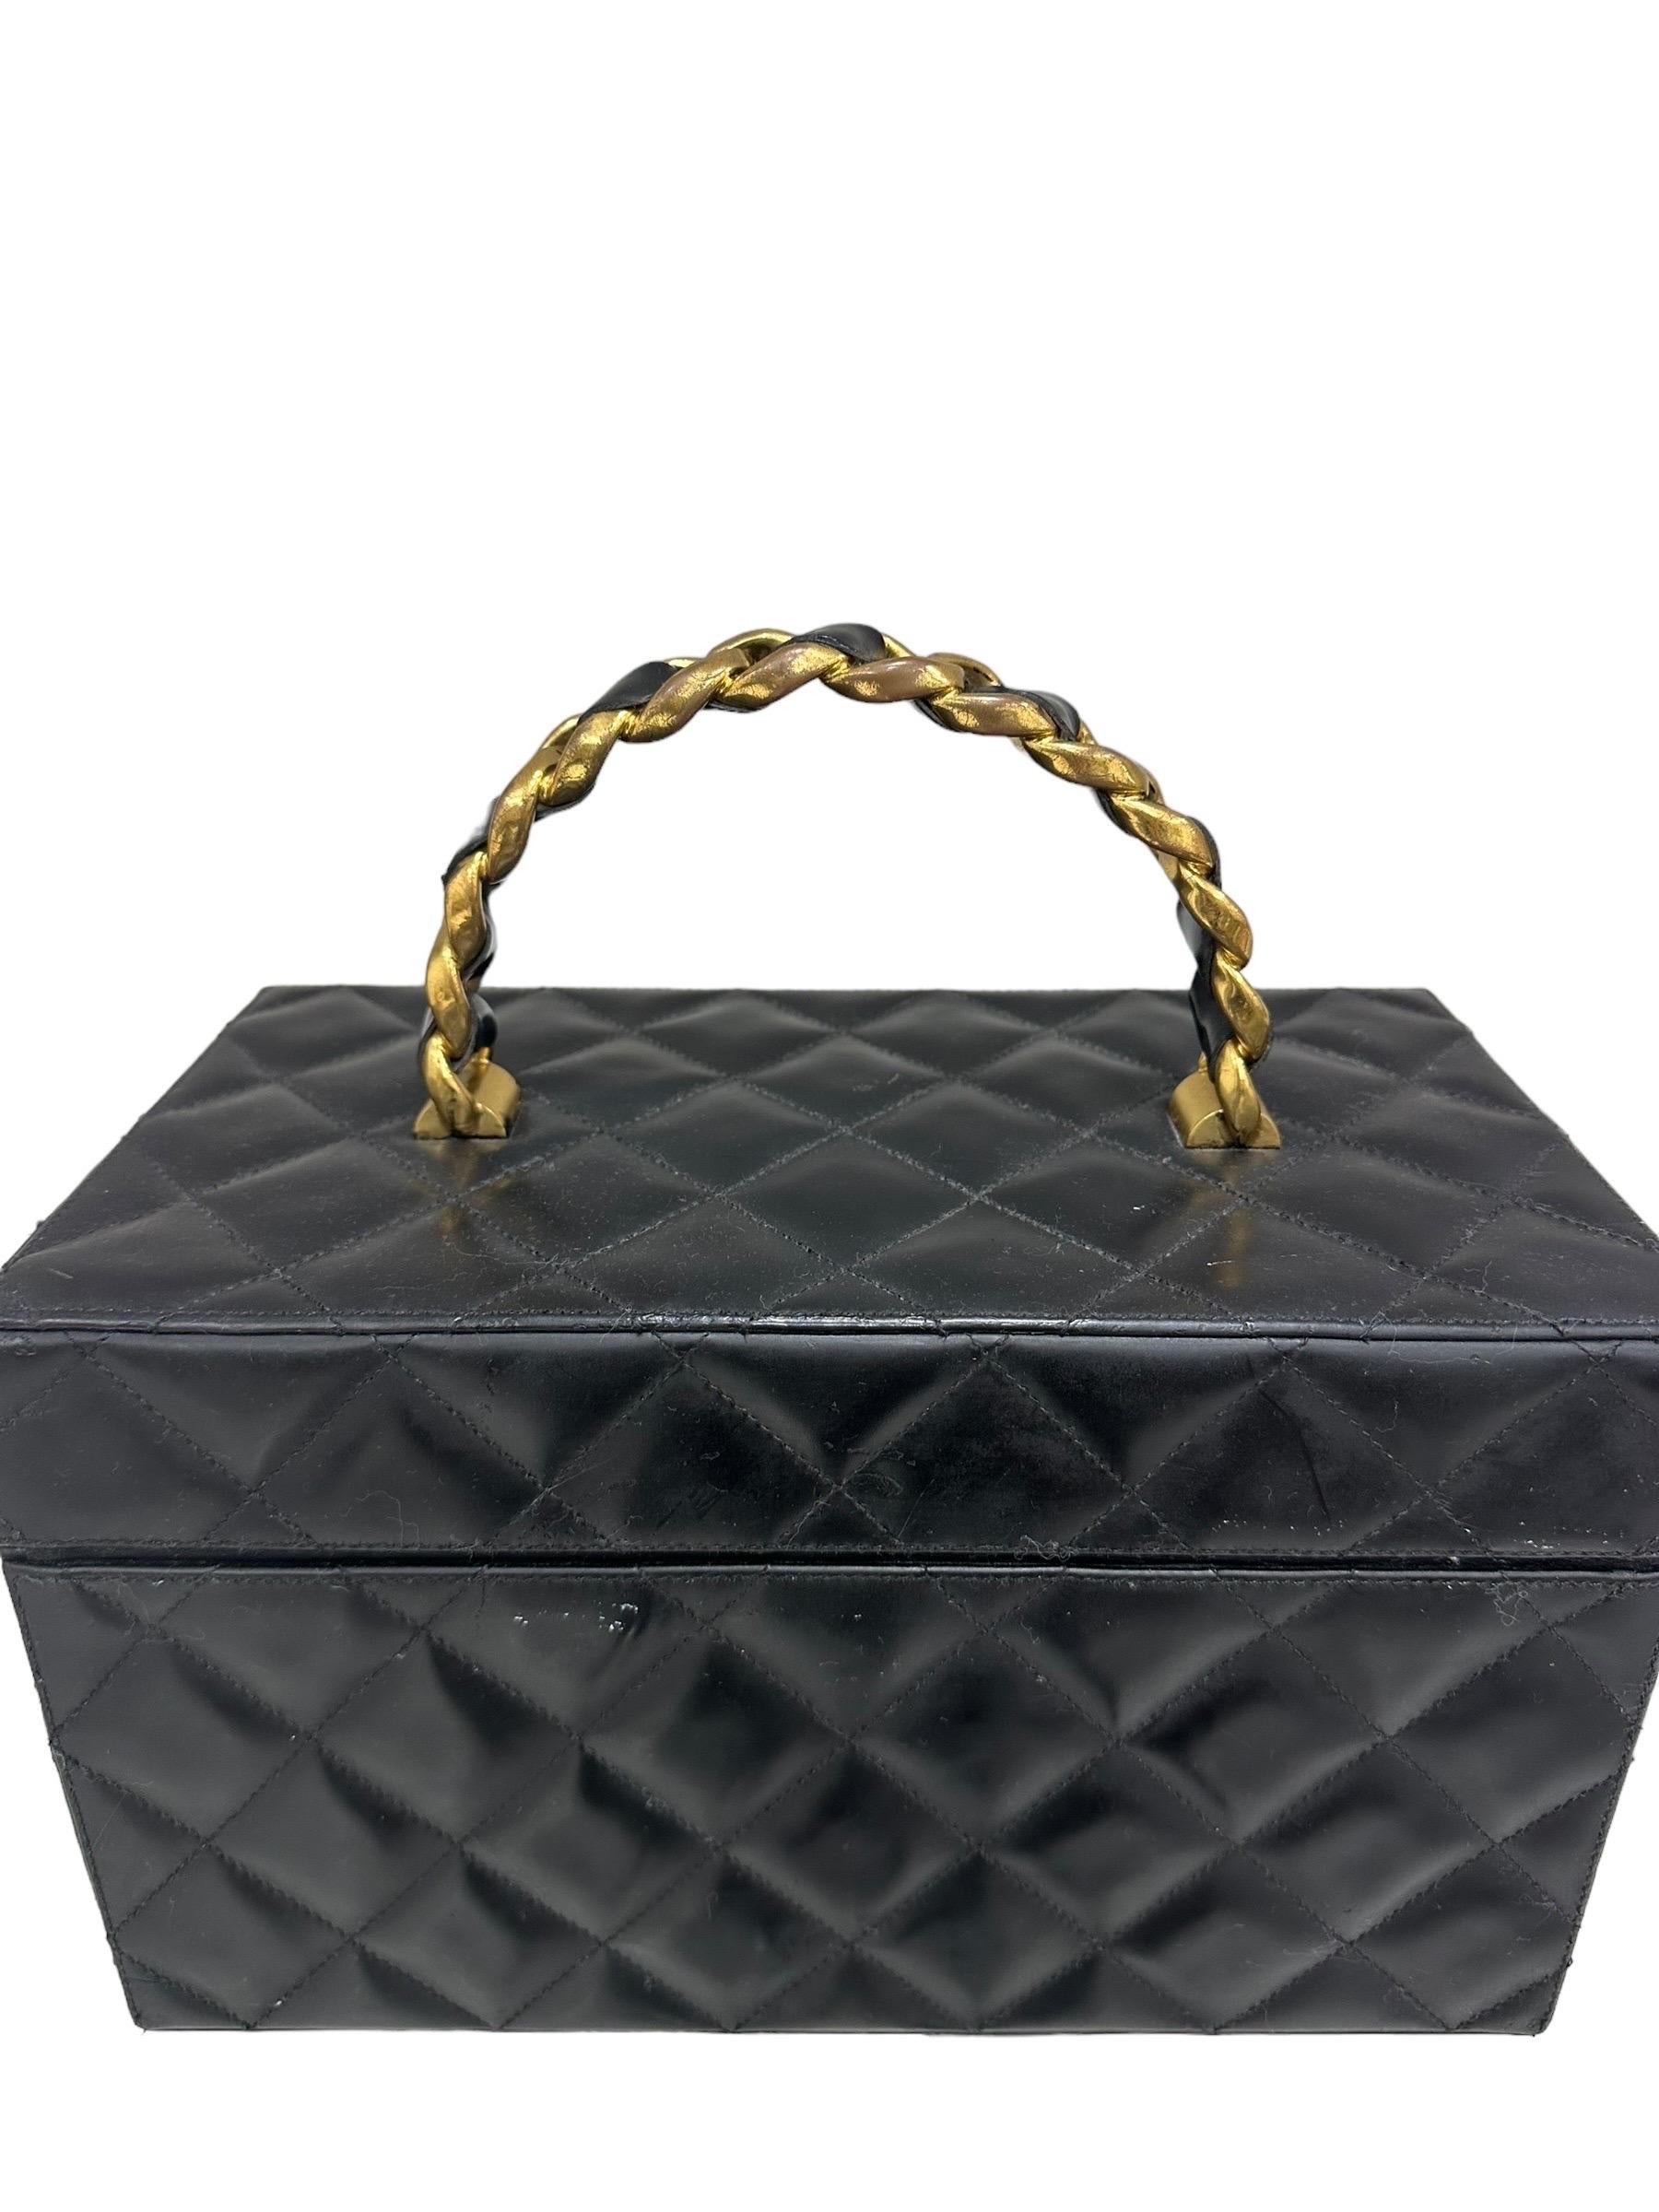 Chanel Beauty Vintage Timaless Pelle Nera For Sale 5